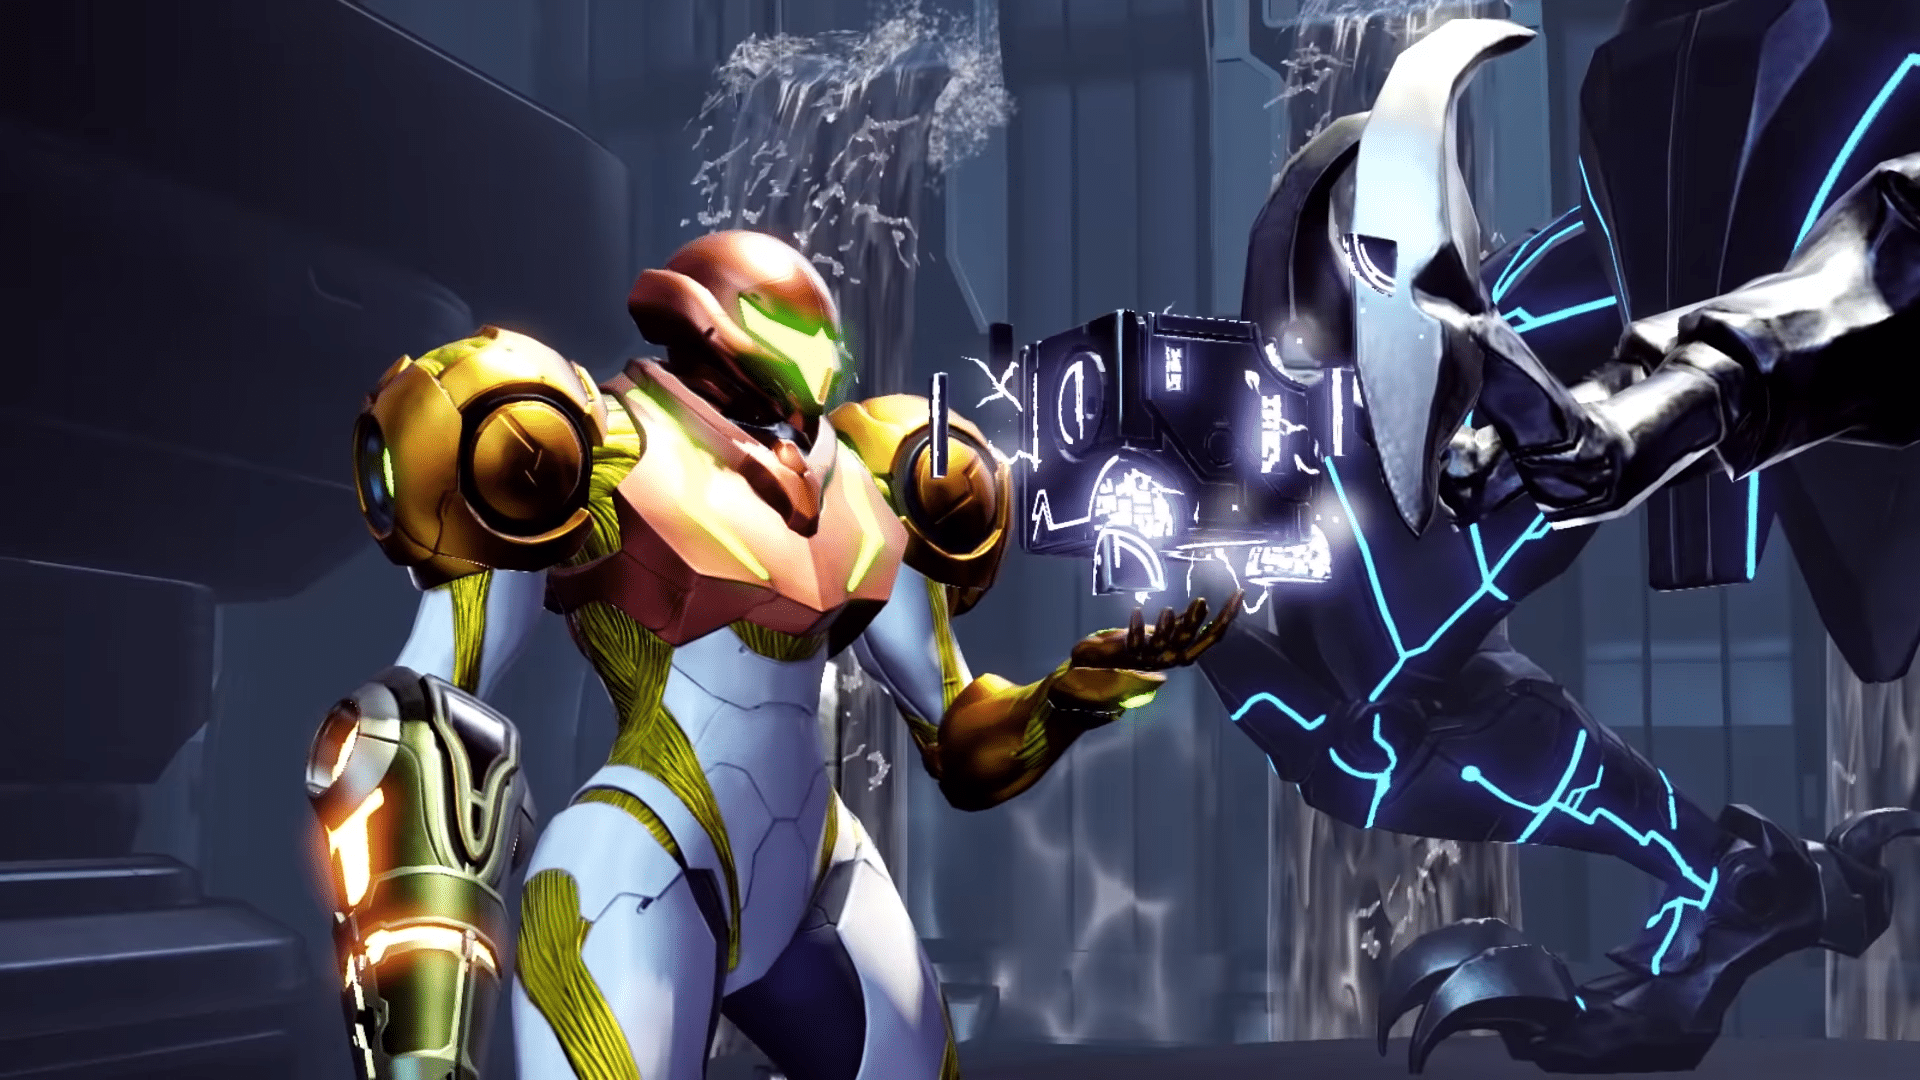 Metroid Dread Staff Members Reveal They Have Been Excluded From Game’s Credits